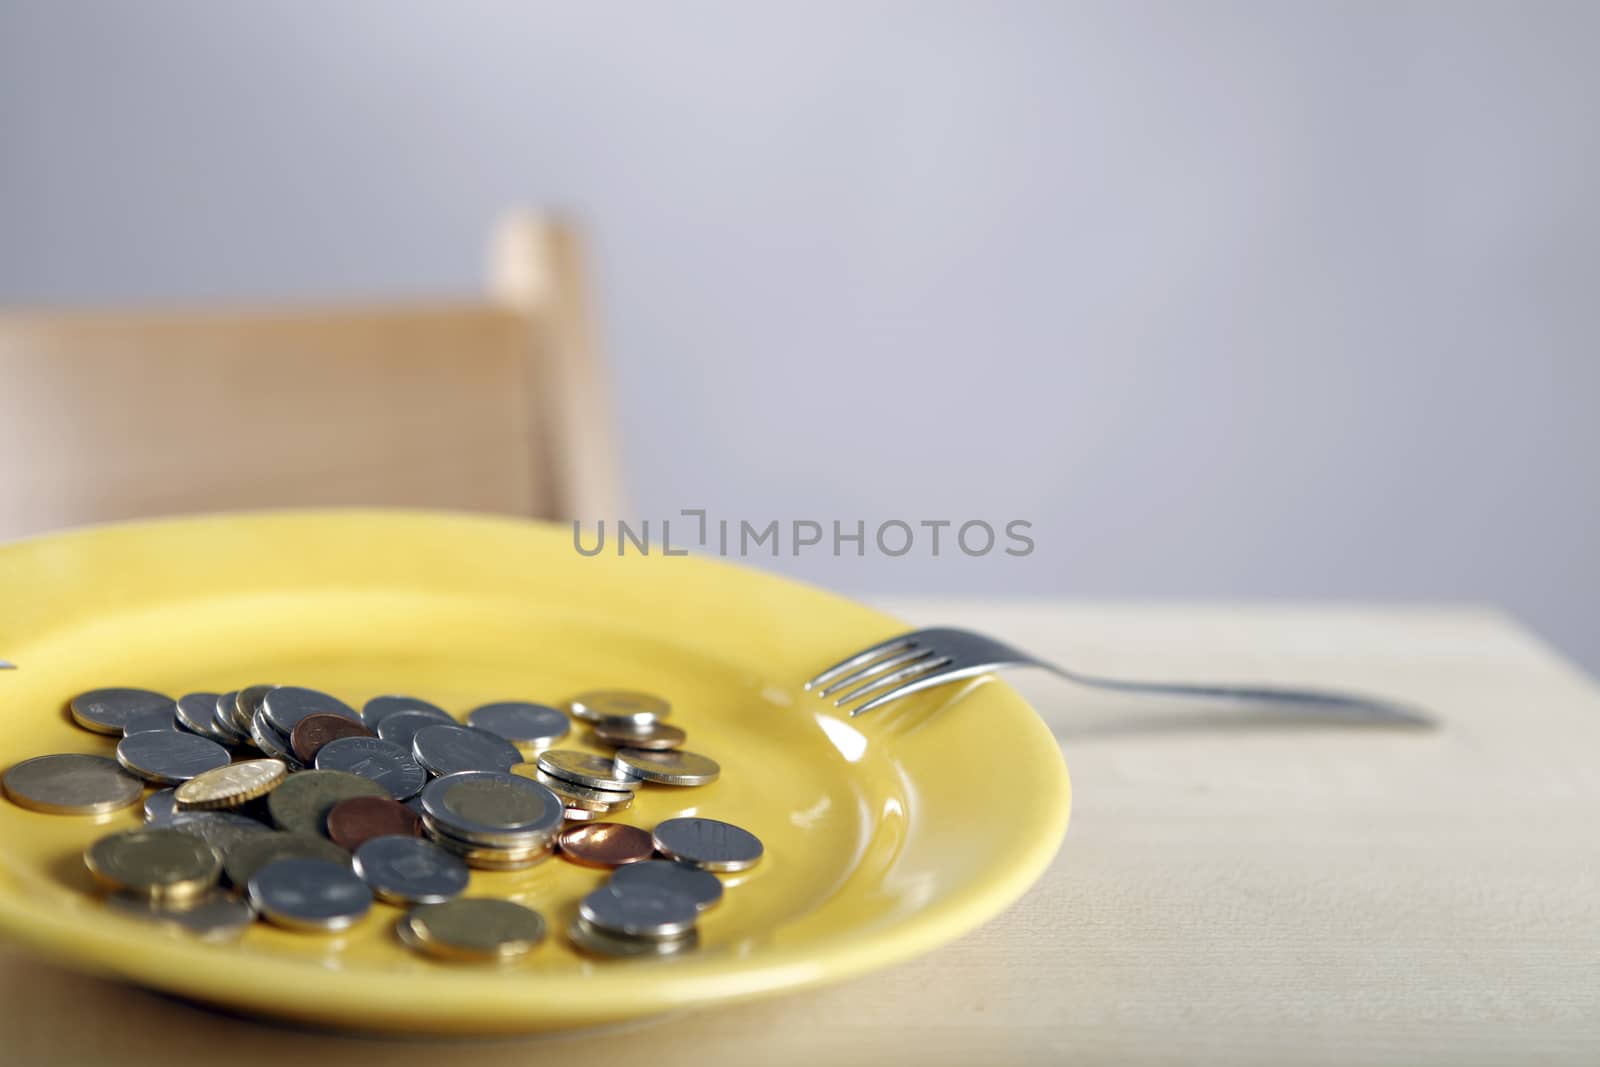 Euro coins in a plate by arosoft